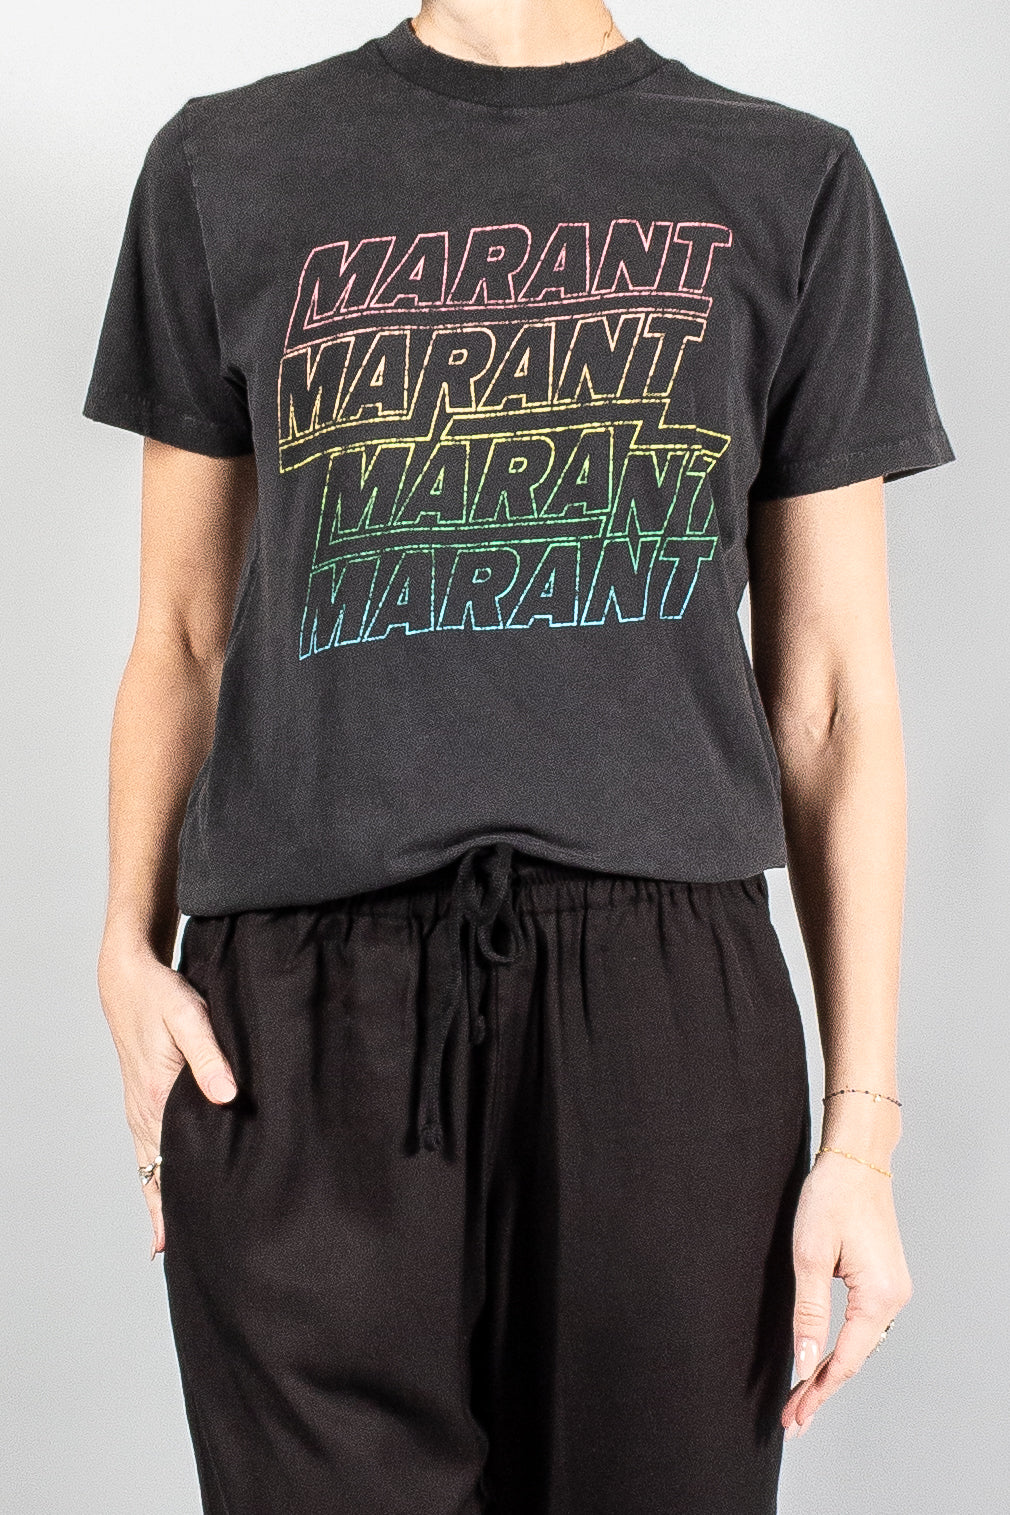 Isabel Marant Etoile Berati Pant-Pants and Shorts-Misch-Boutique-Vancouver-Canada-misch.ca